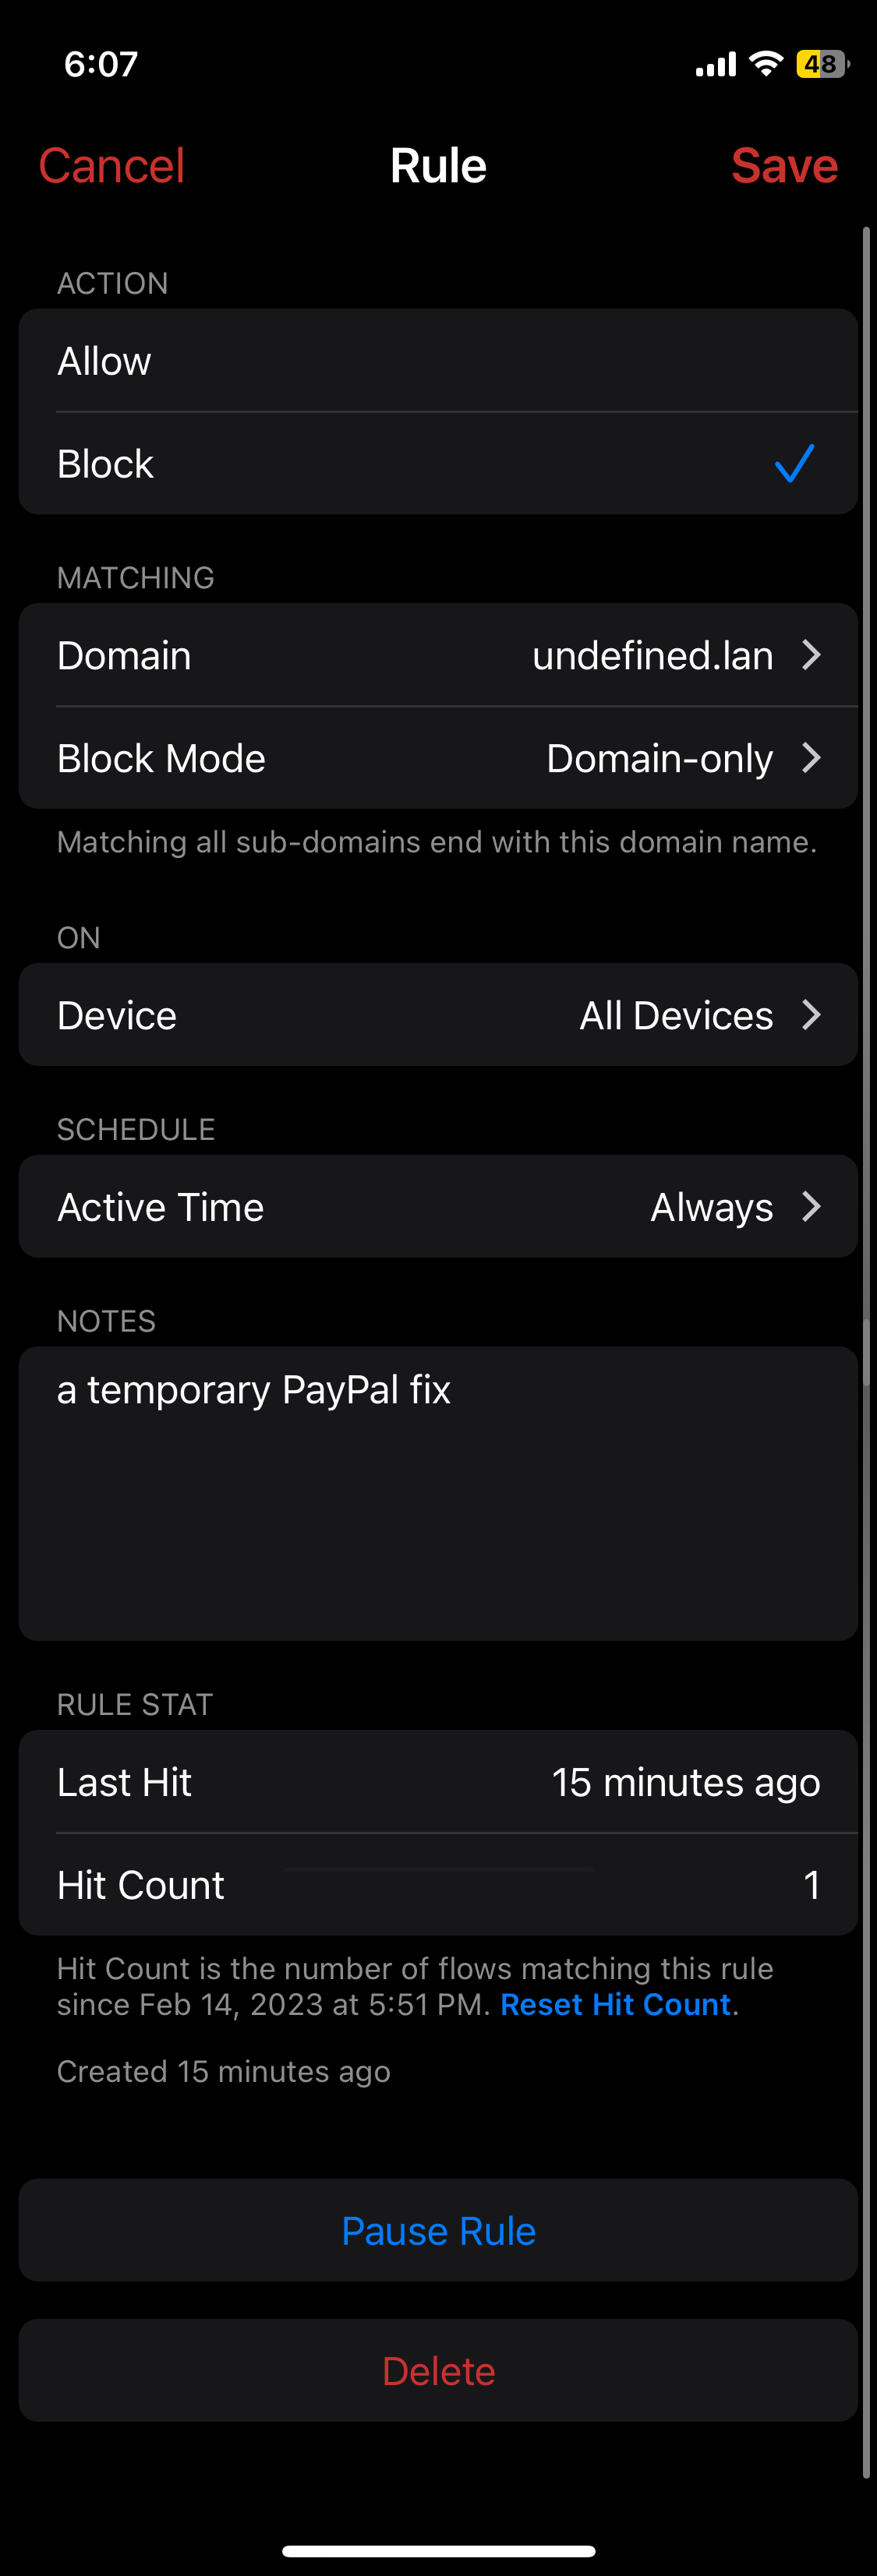 Paypal mfa workaround with blocking rule